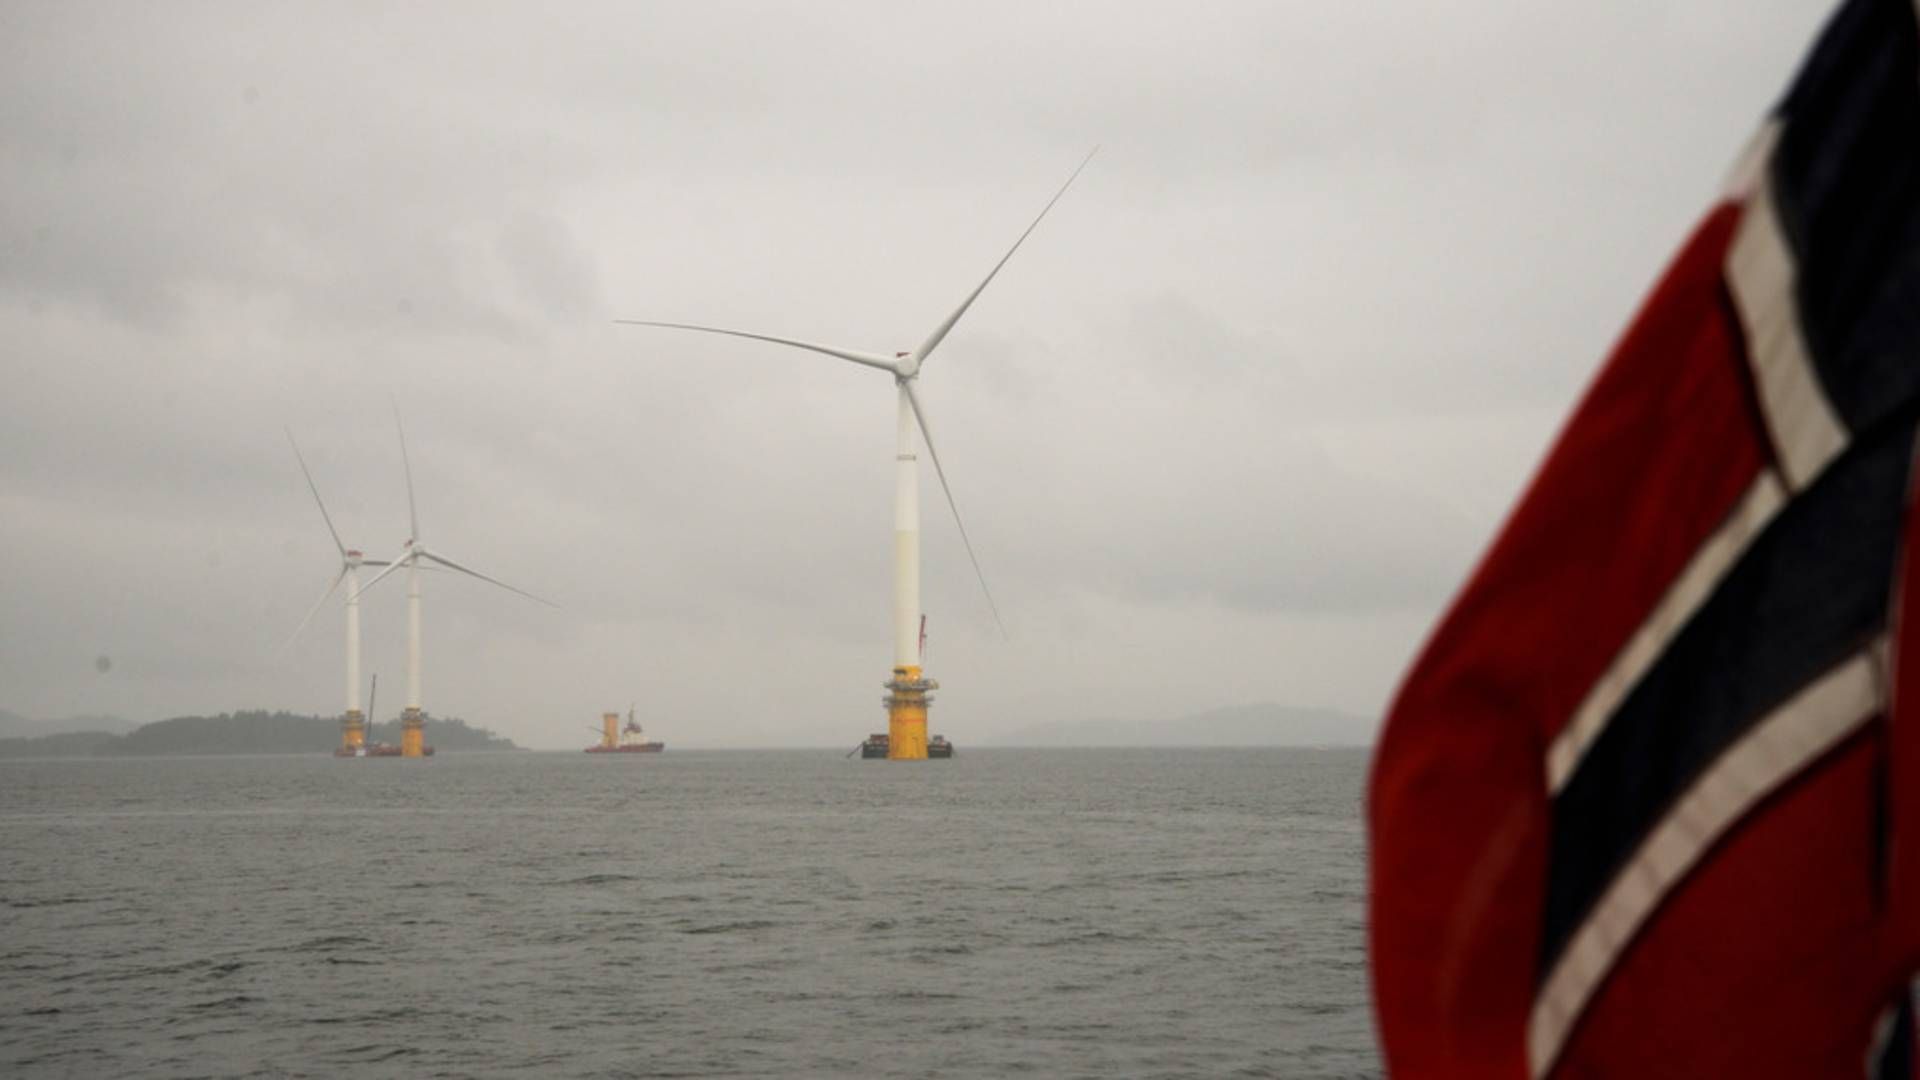 Instead of aiding the oil industry, Norway's government could have built offshore wind farms, says BNEF. | Photo: Arne Reidar Mortensen/Equinor